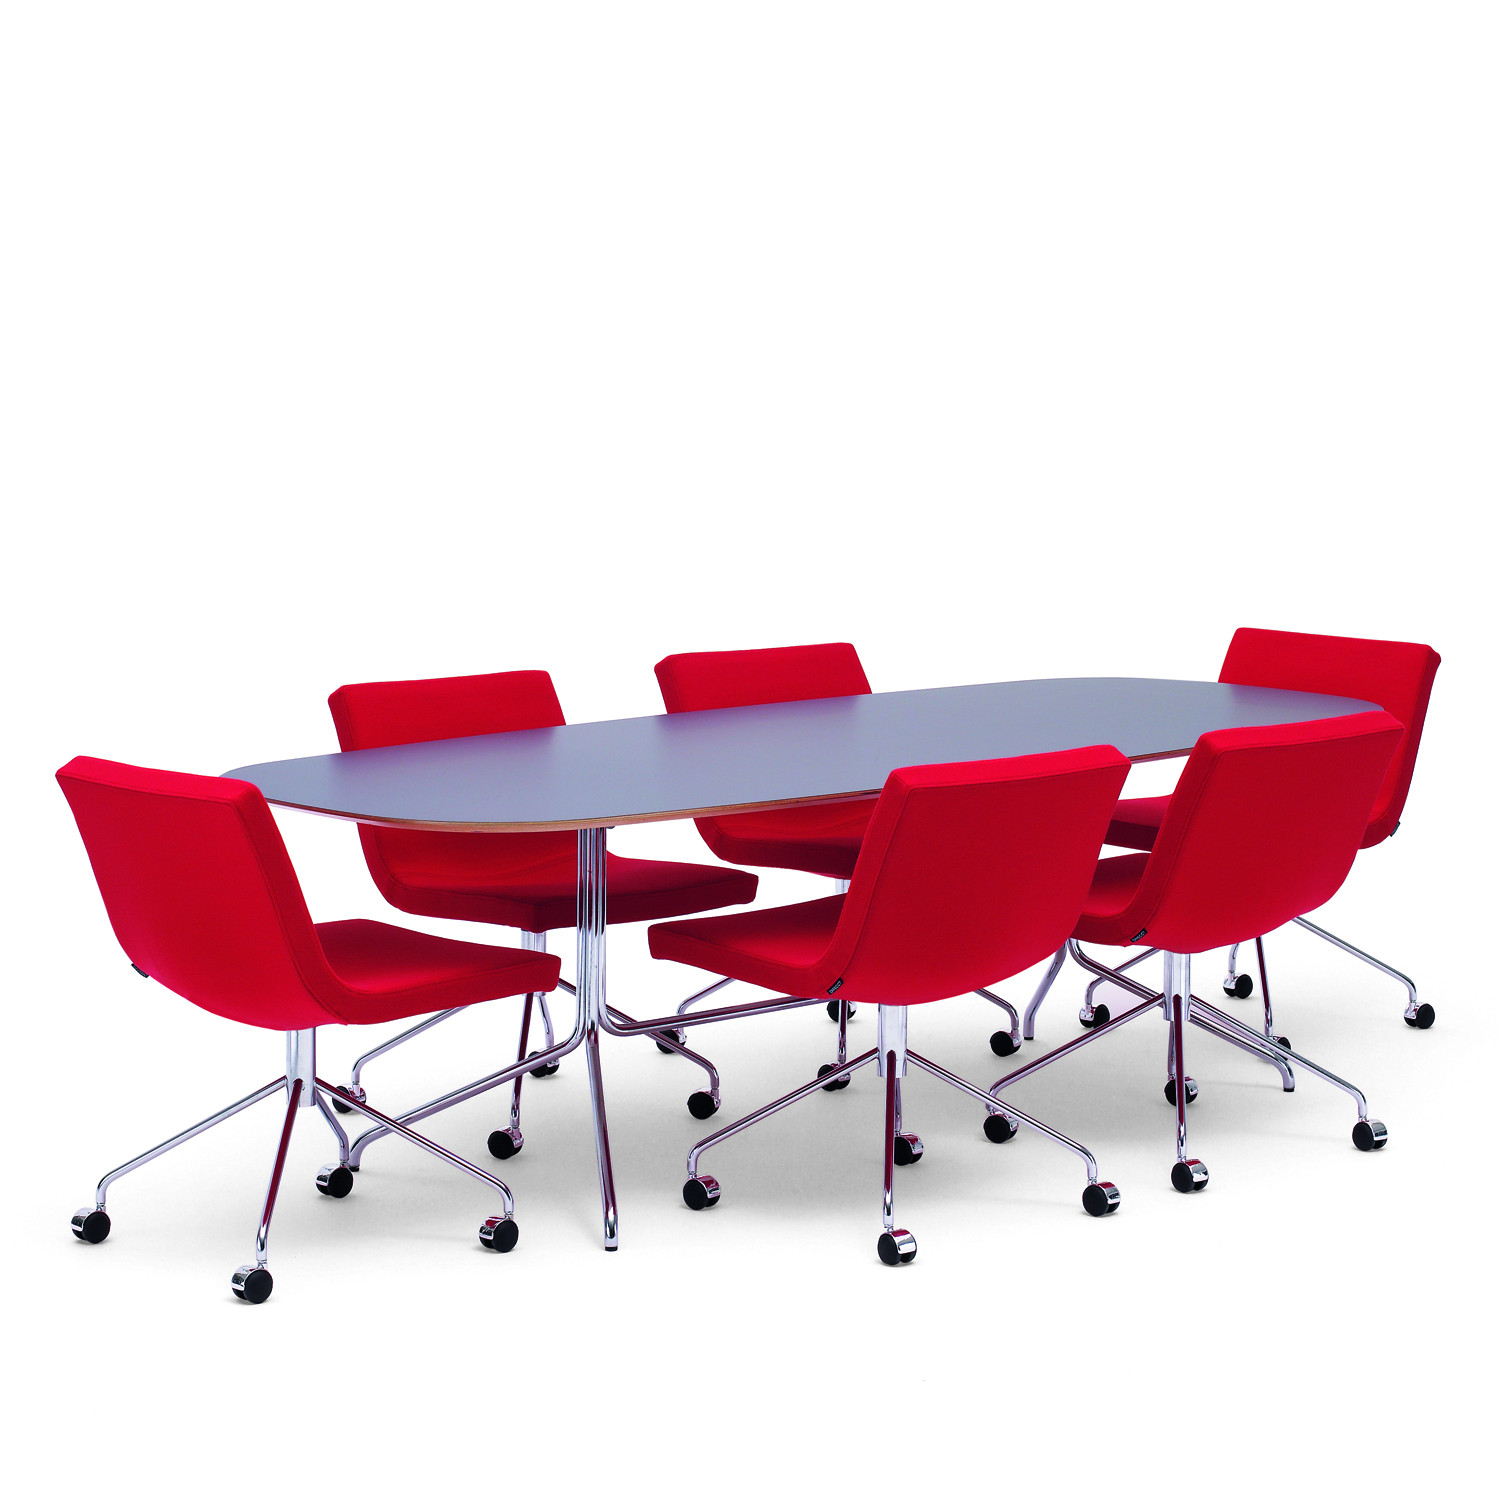 Bond XL Table by Offecct